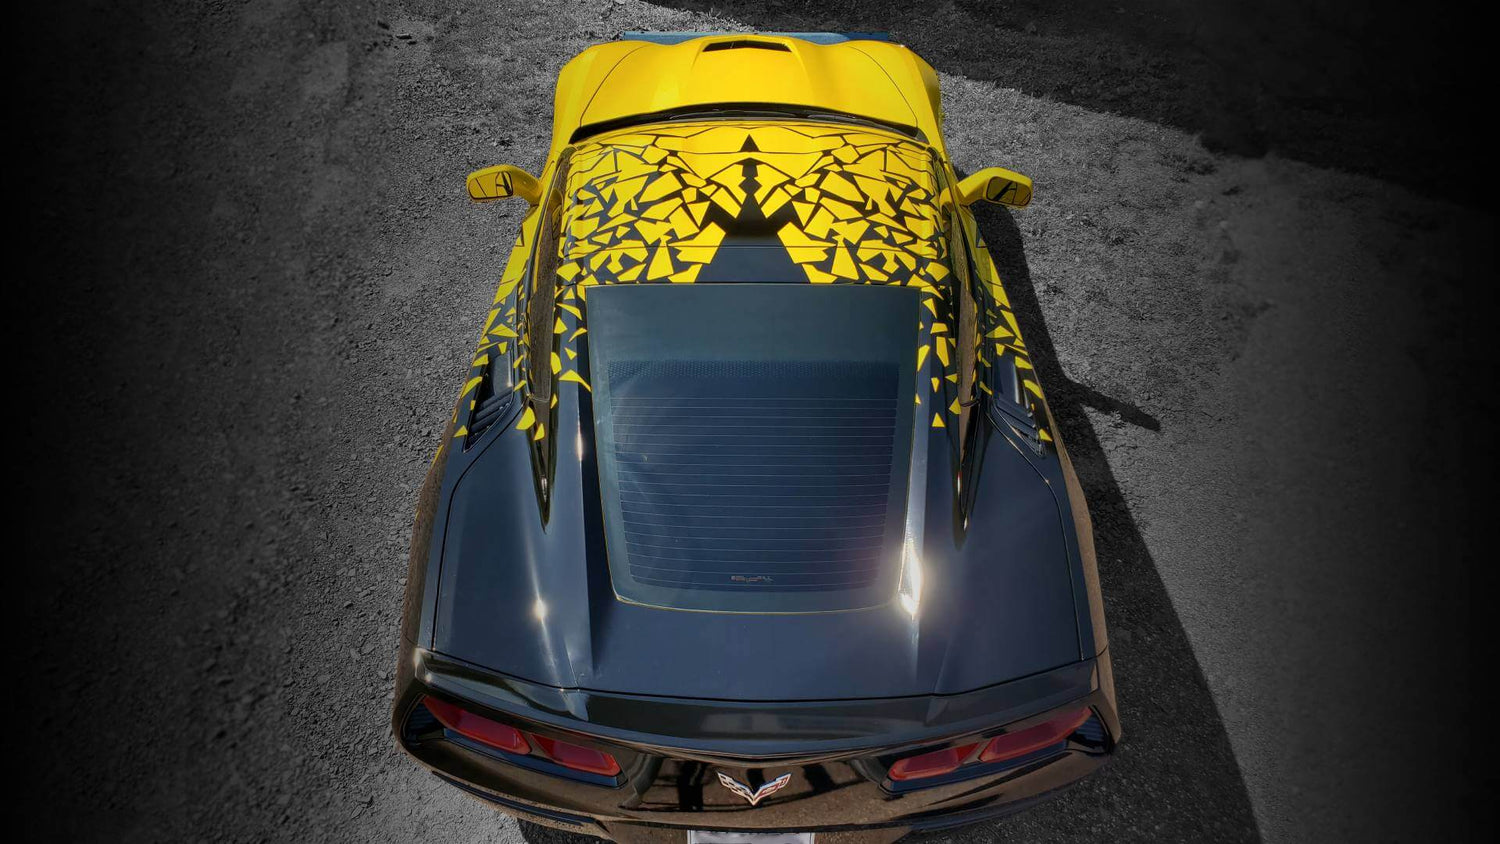 Sports car with yellow and black colored vinyl wrap.